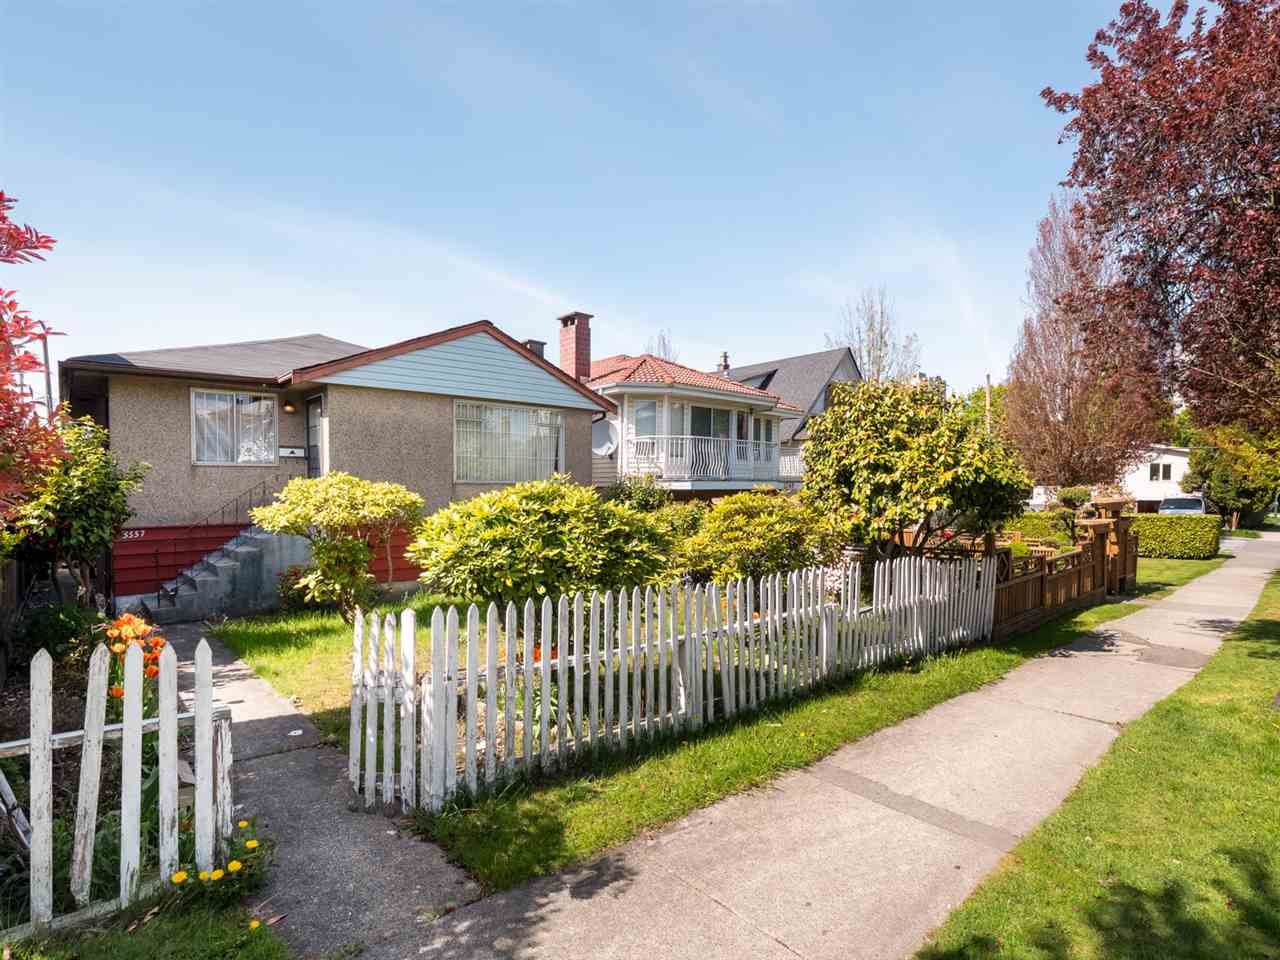 Main Photo: 5557 STAMFORD STREET in Vancouver: Collingwood VE House for sale (Vancouver East)  : MLS®# R2365631